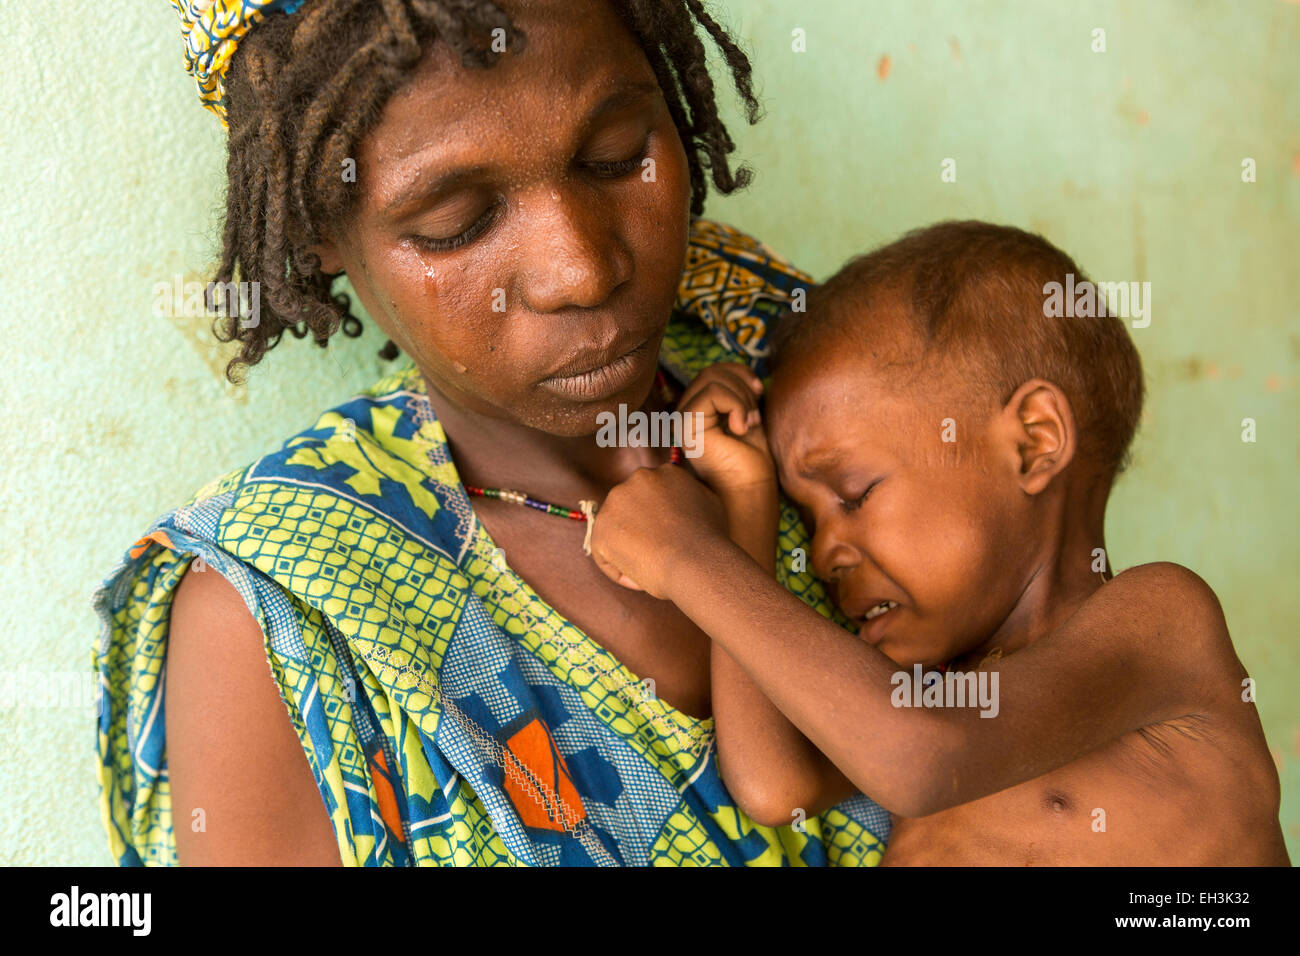 KOMOBANGAU, TILLABERI PROVINCE, NIGER, 15th May 2012: Fatimata Birma, and her son aged two, are treated at the health clinic for severe malnutition. Stock Photo